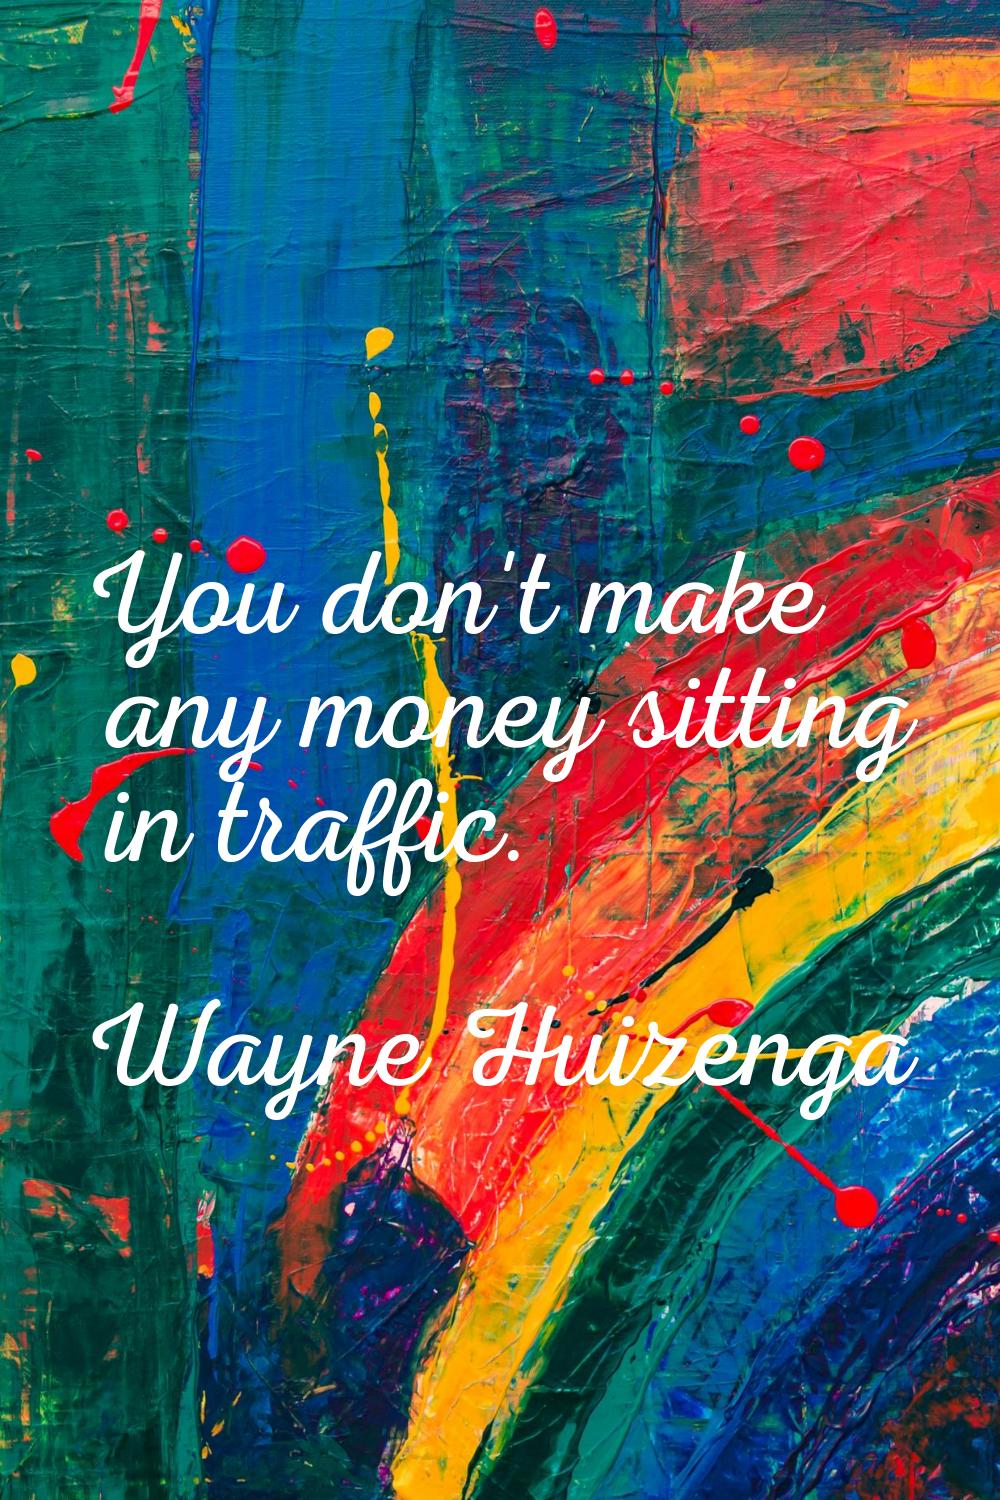 You don't make any money sitting in traffic.